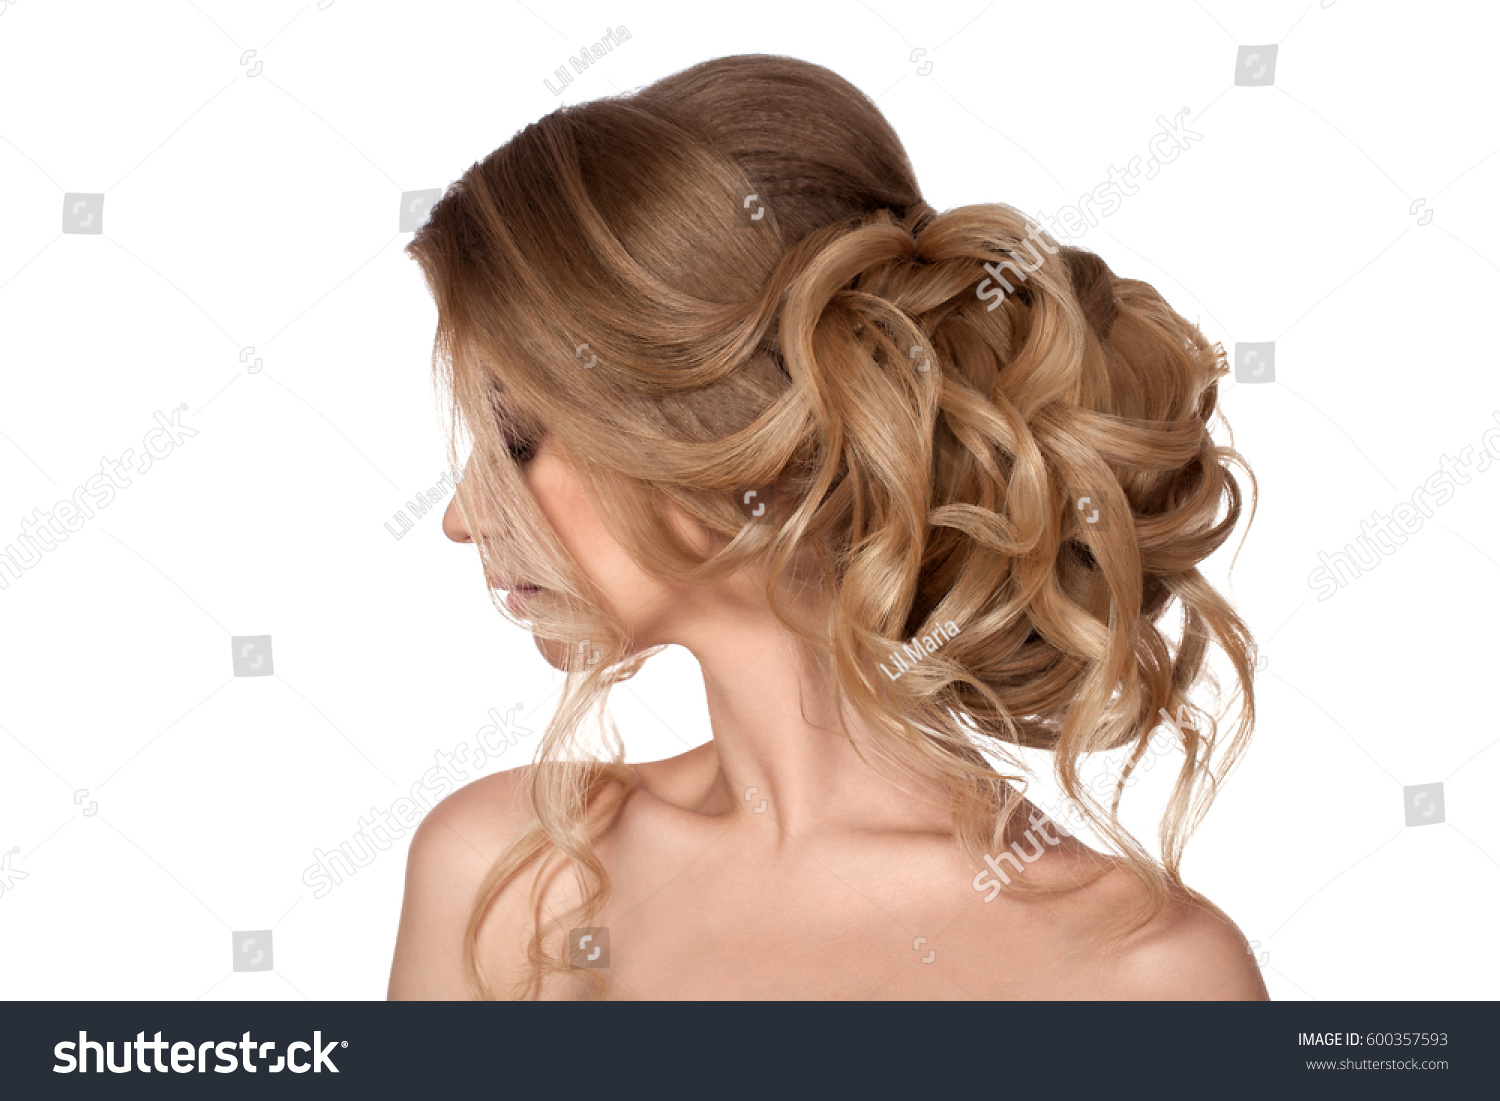 Blonde Girl Curly Hair Haircut Smooth Stock Photo Edit Now 600357593